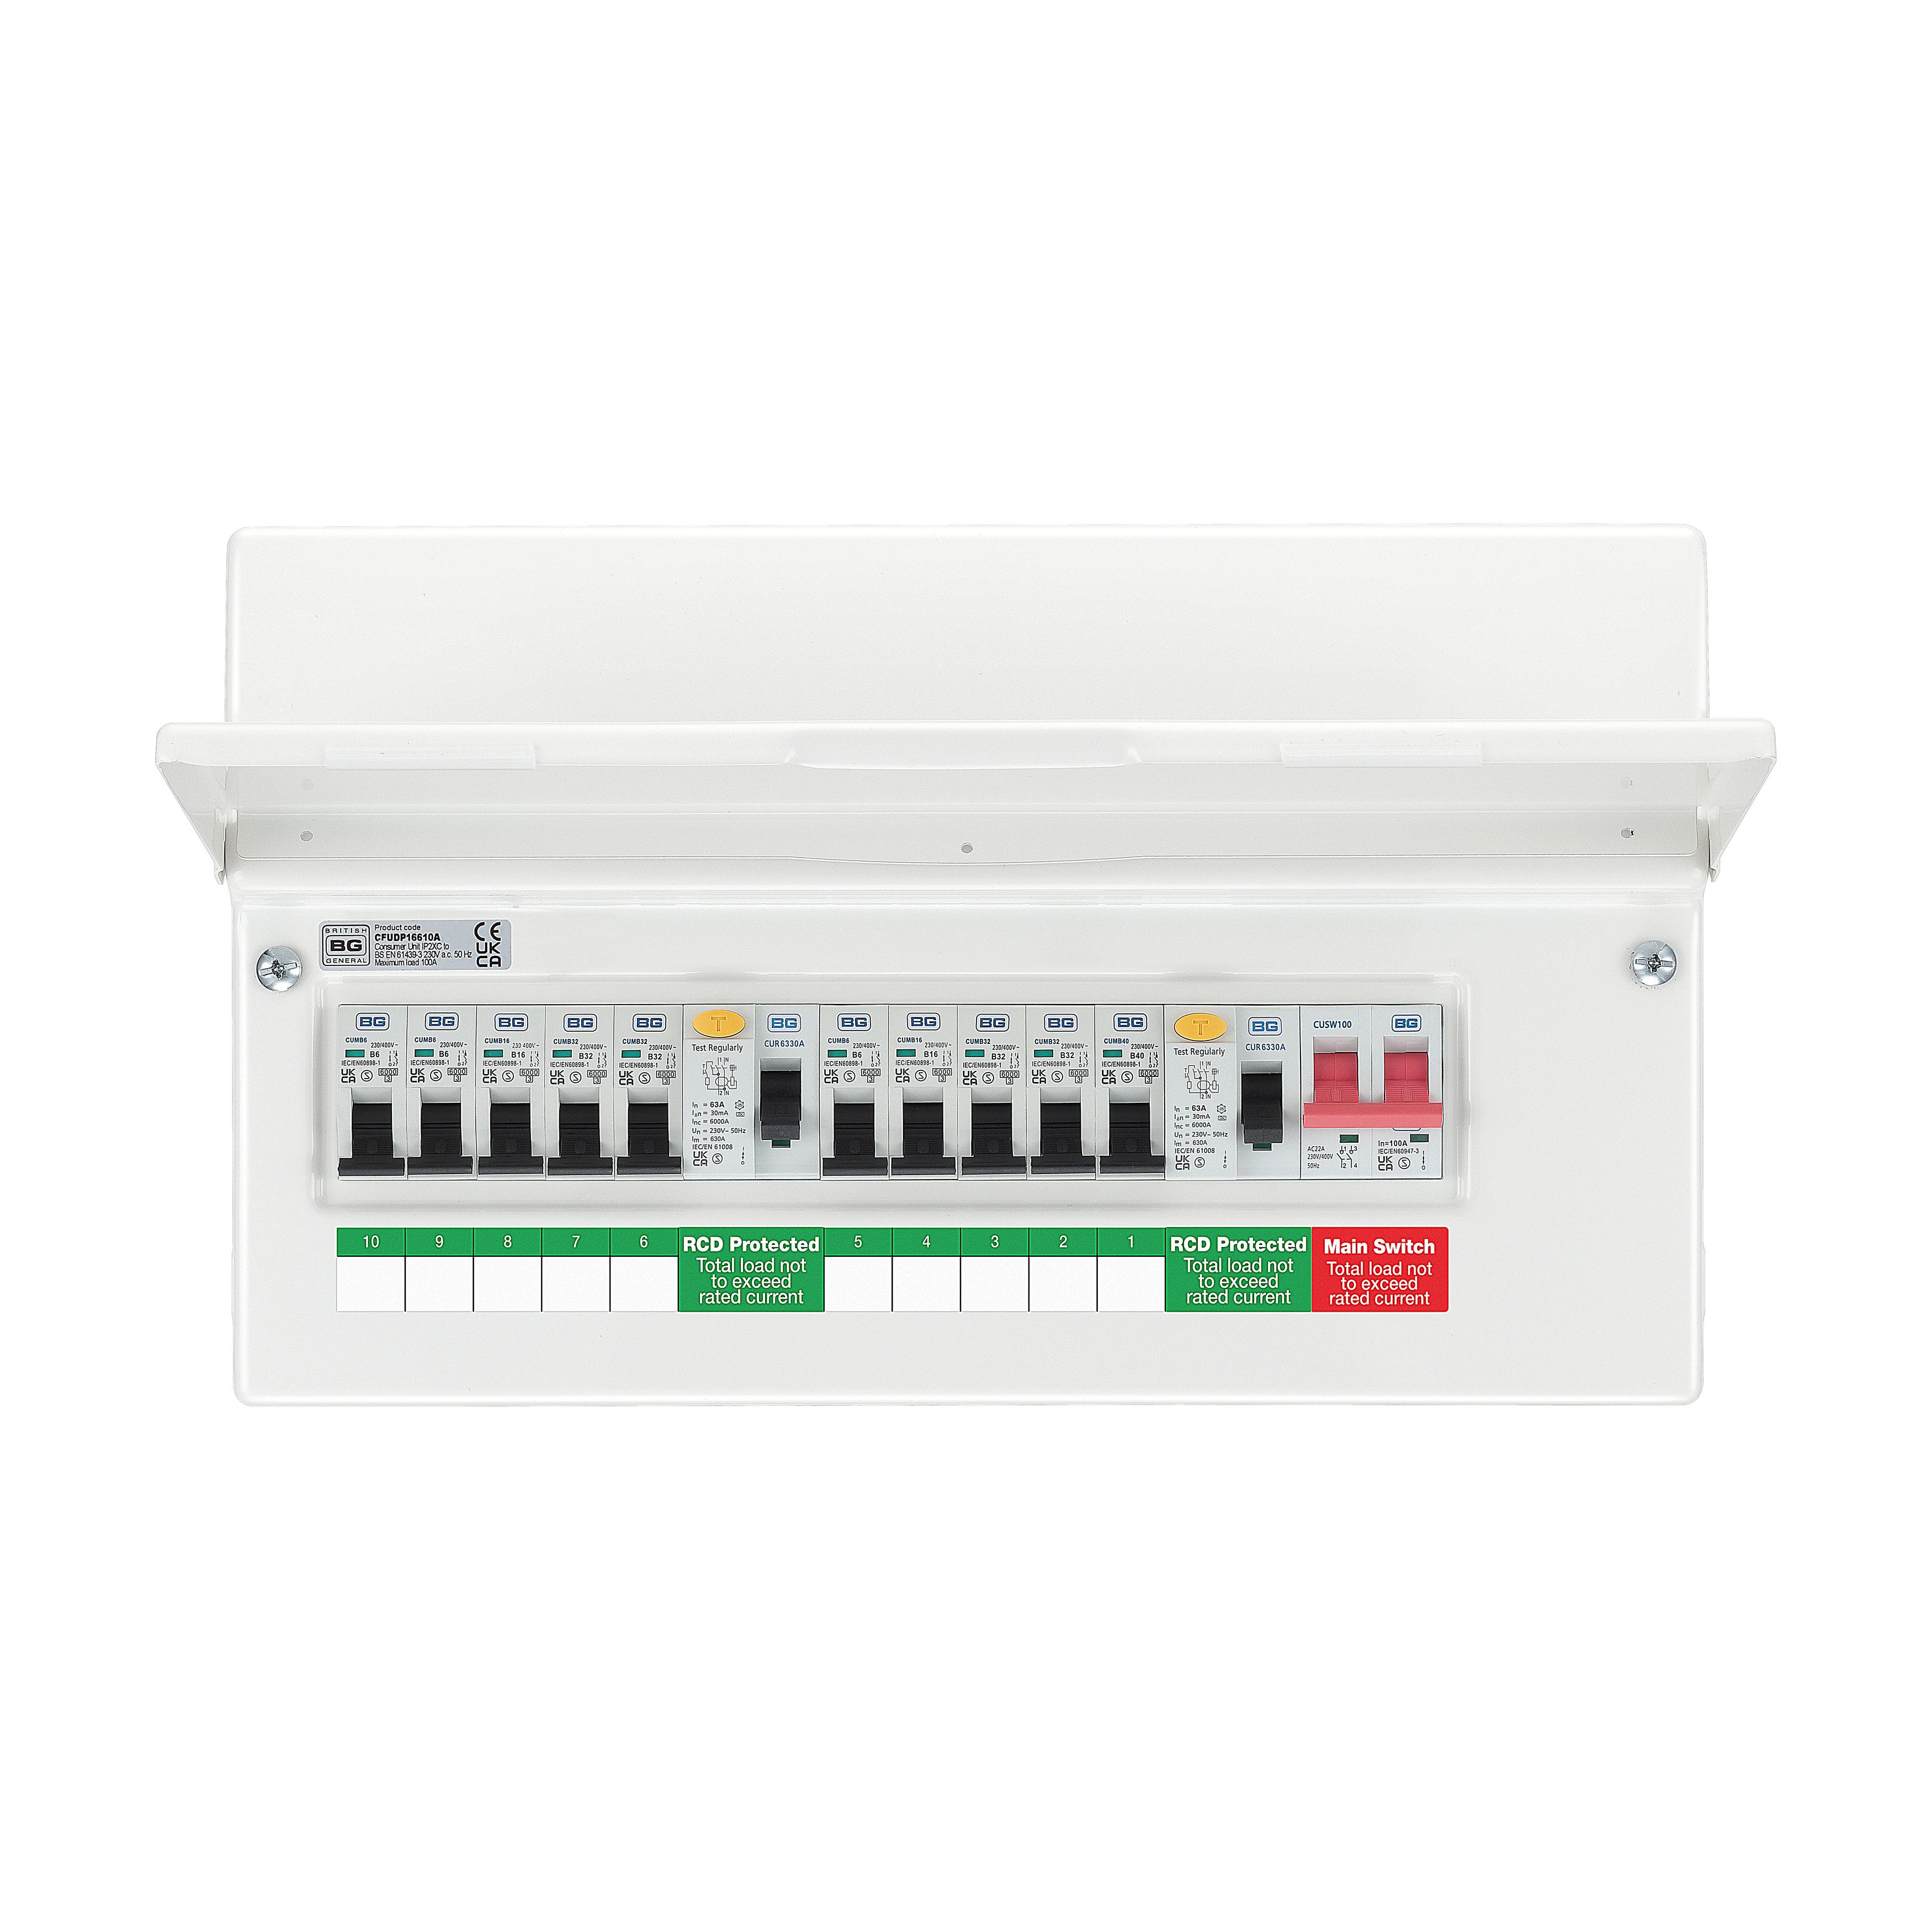 BG 10-way High integrity dual RCD Consumer unit with 63A mains switch